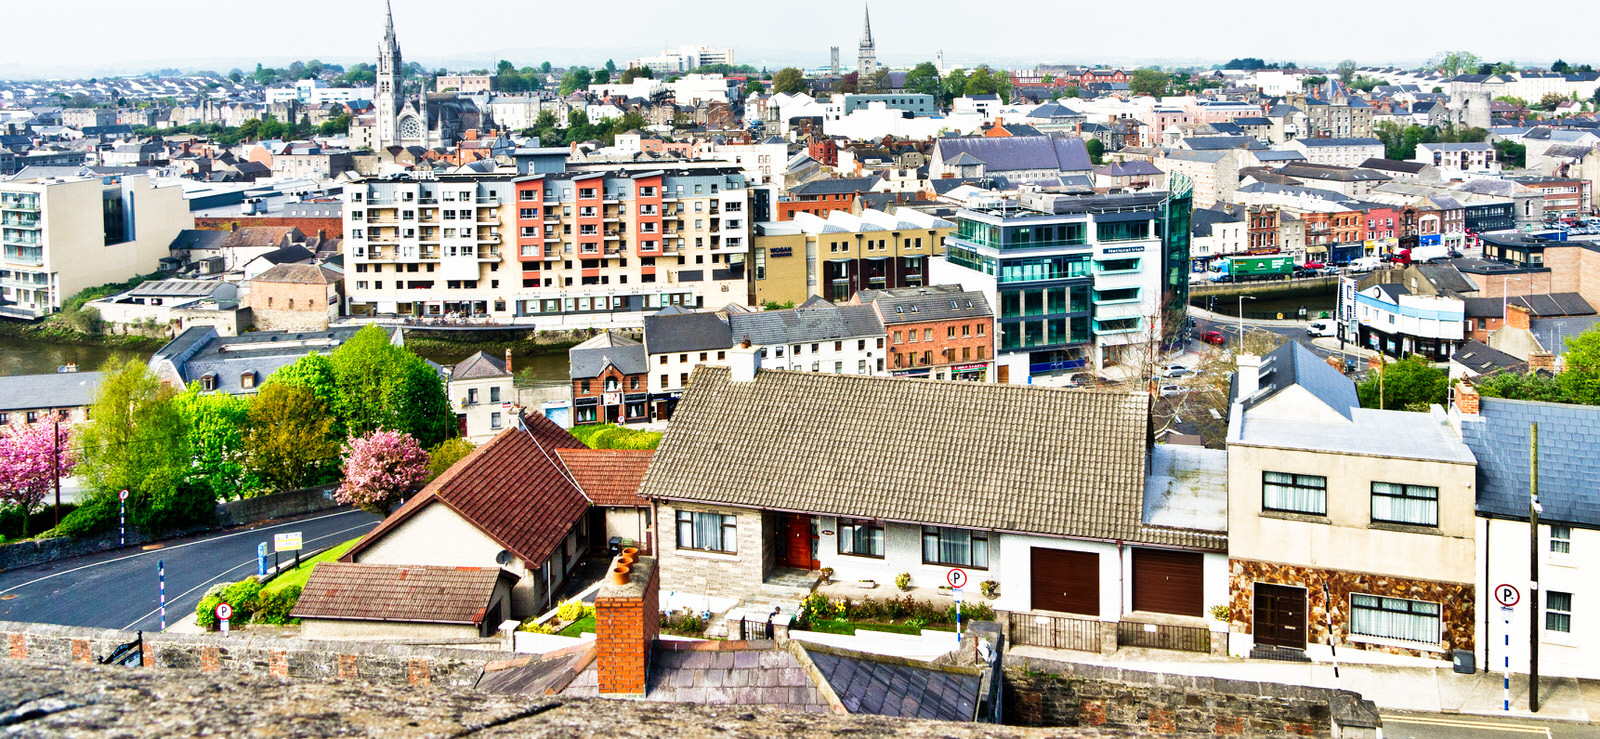 PANORAMIC VIEWS OF DROGHEDA AS IT WAS WAS IN 2011 [PRODUCED USING SONY NEX-5 PANORAMA MODE] 002